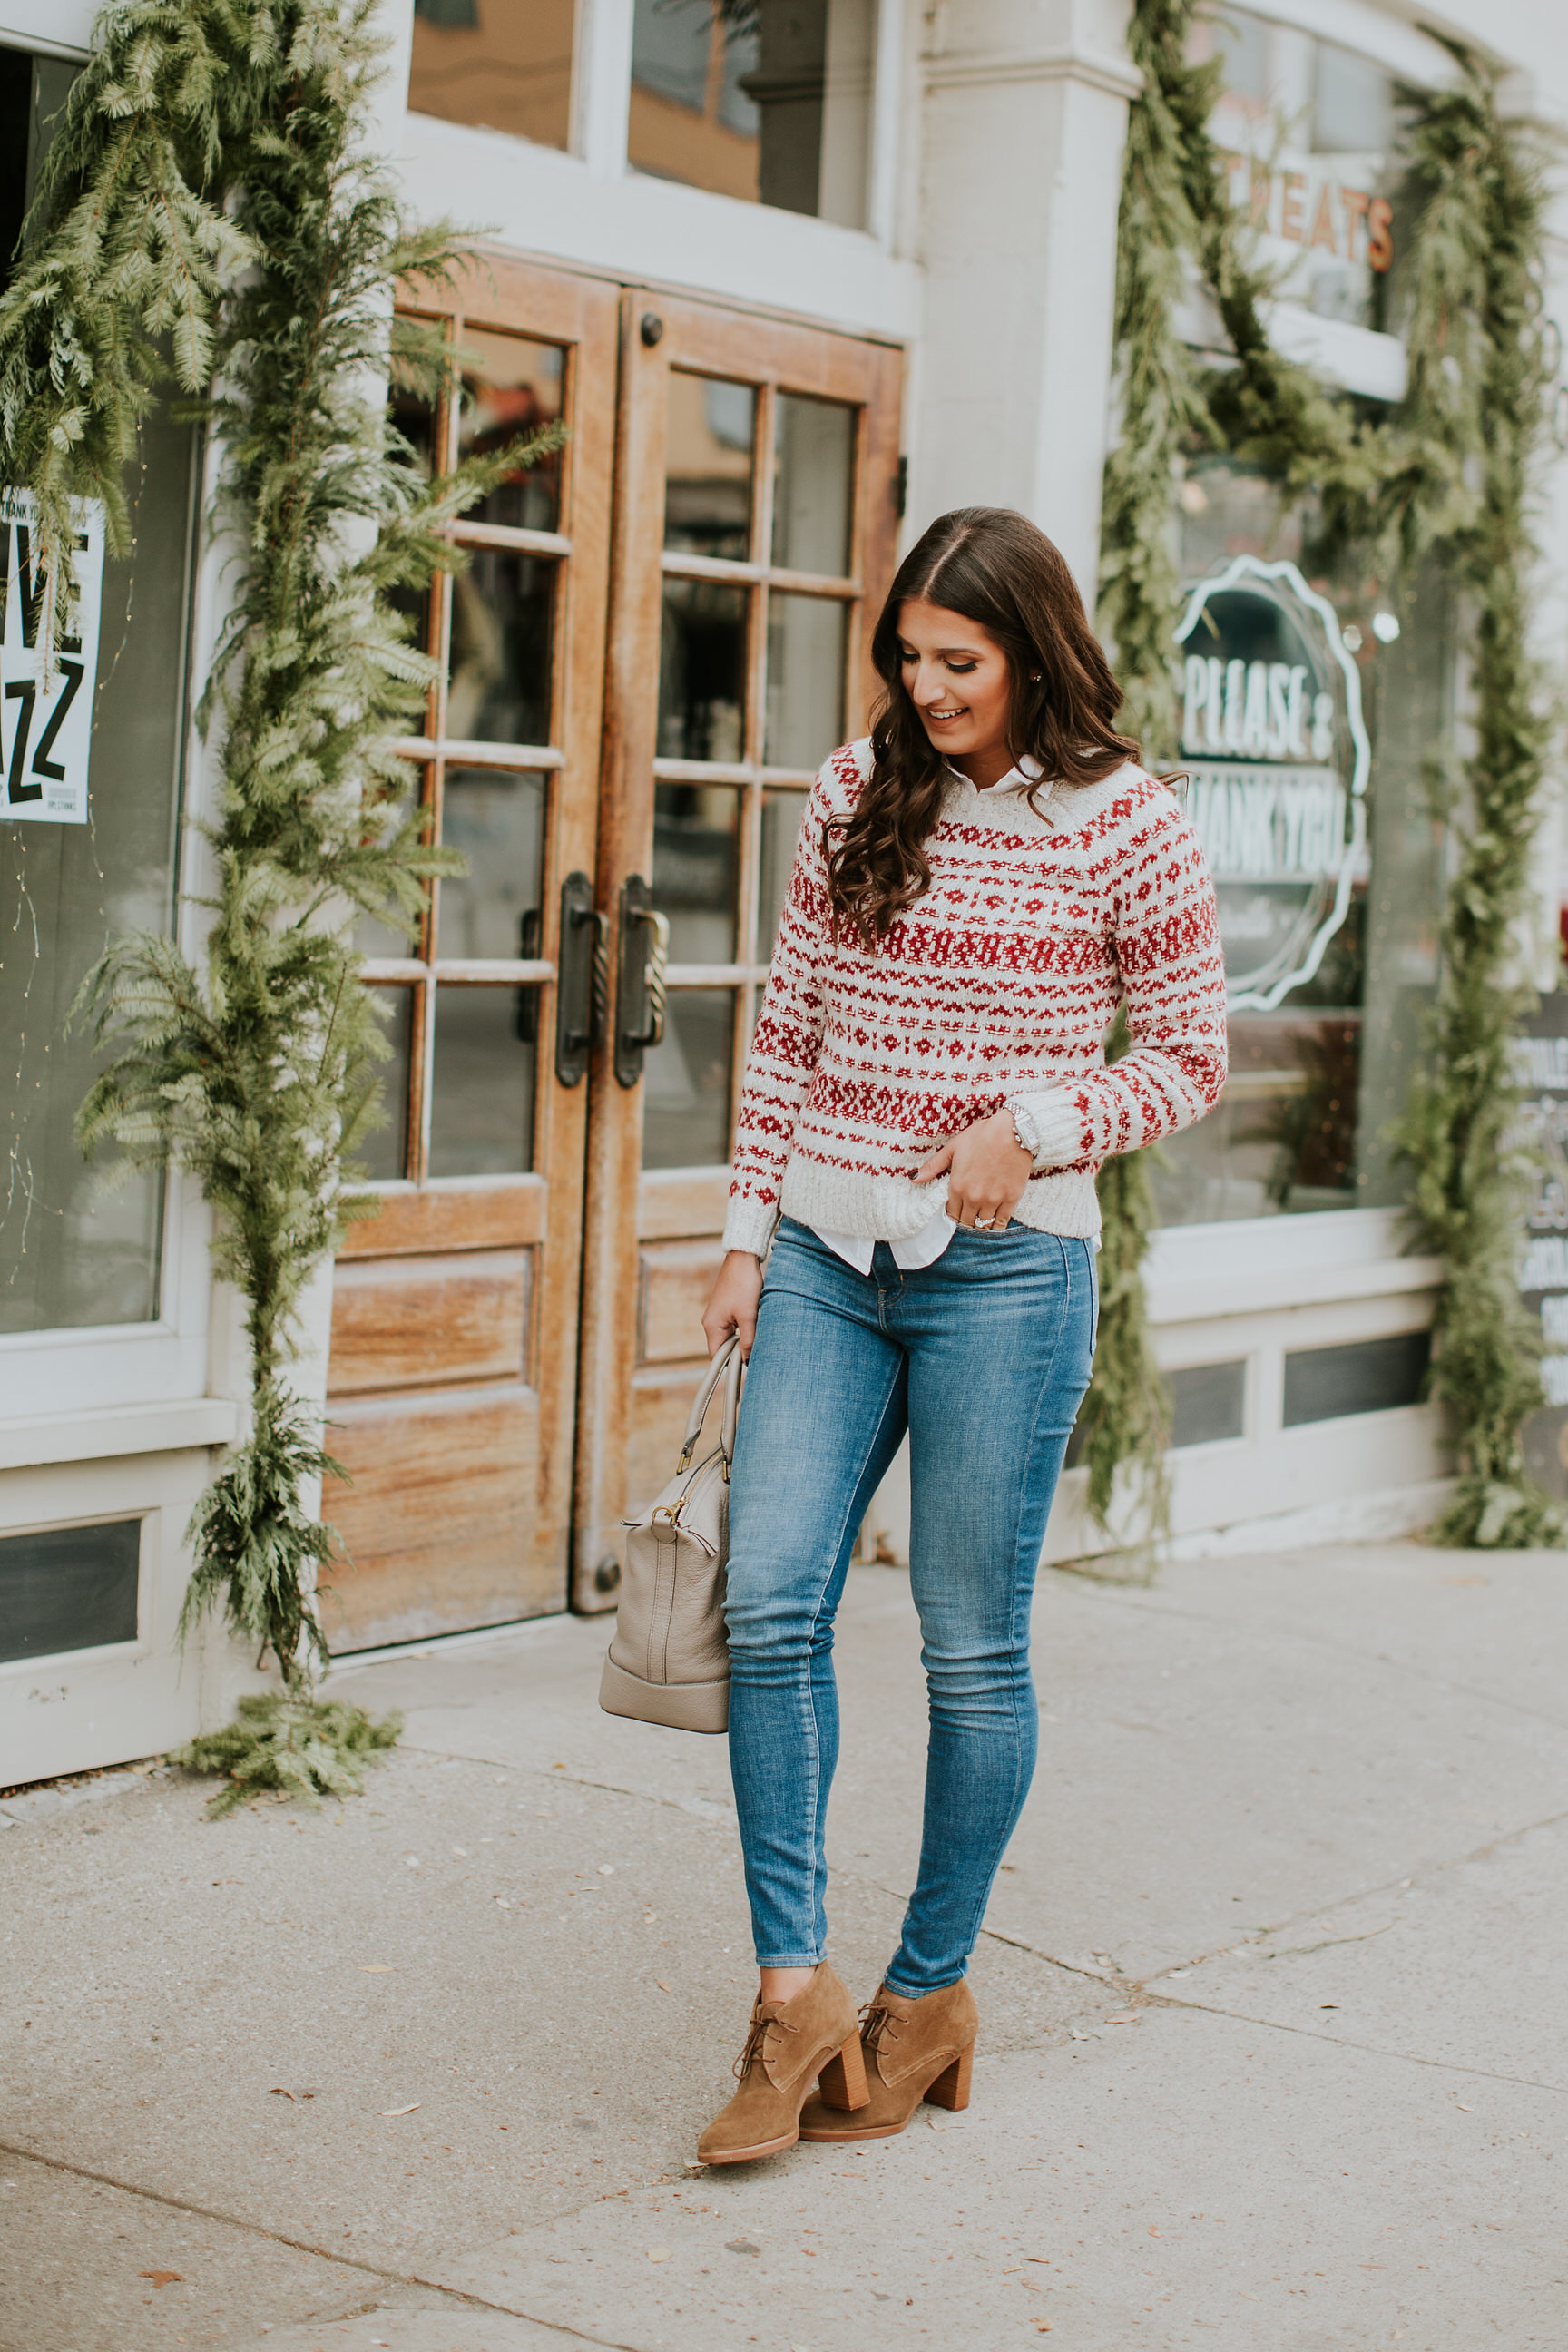 holiday sweater, fair isle sweater, holiday fair isle, abercrombie and fitch sweater, christmas sweater, christmas outfit, holiday outfit, winter style, winter fashion // grace wainwright a southern drawl